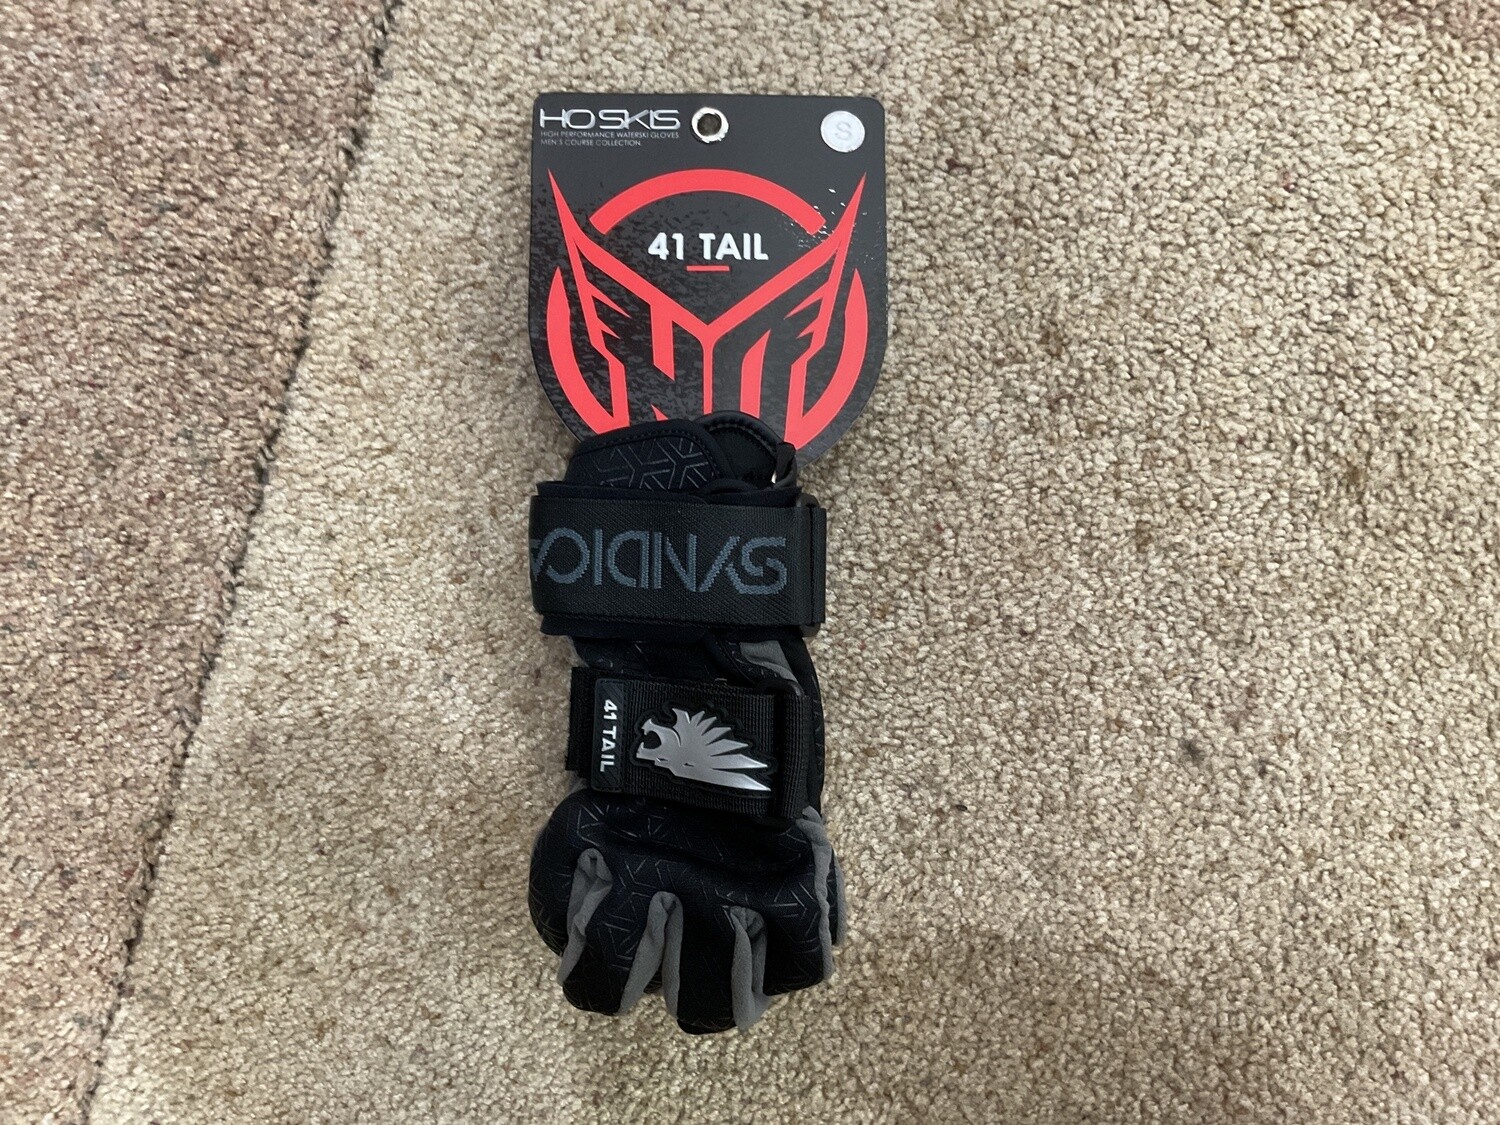 HO SKIS Syndicate 41 Tail Glove